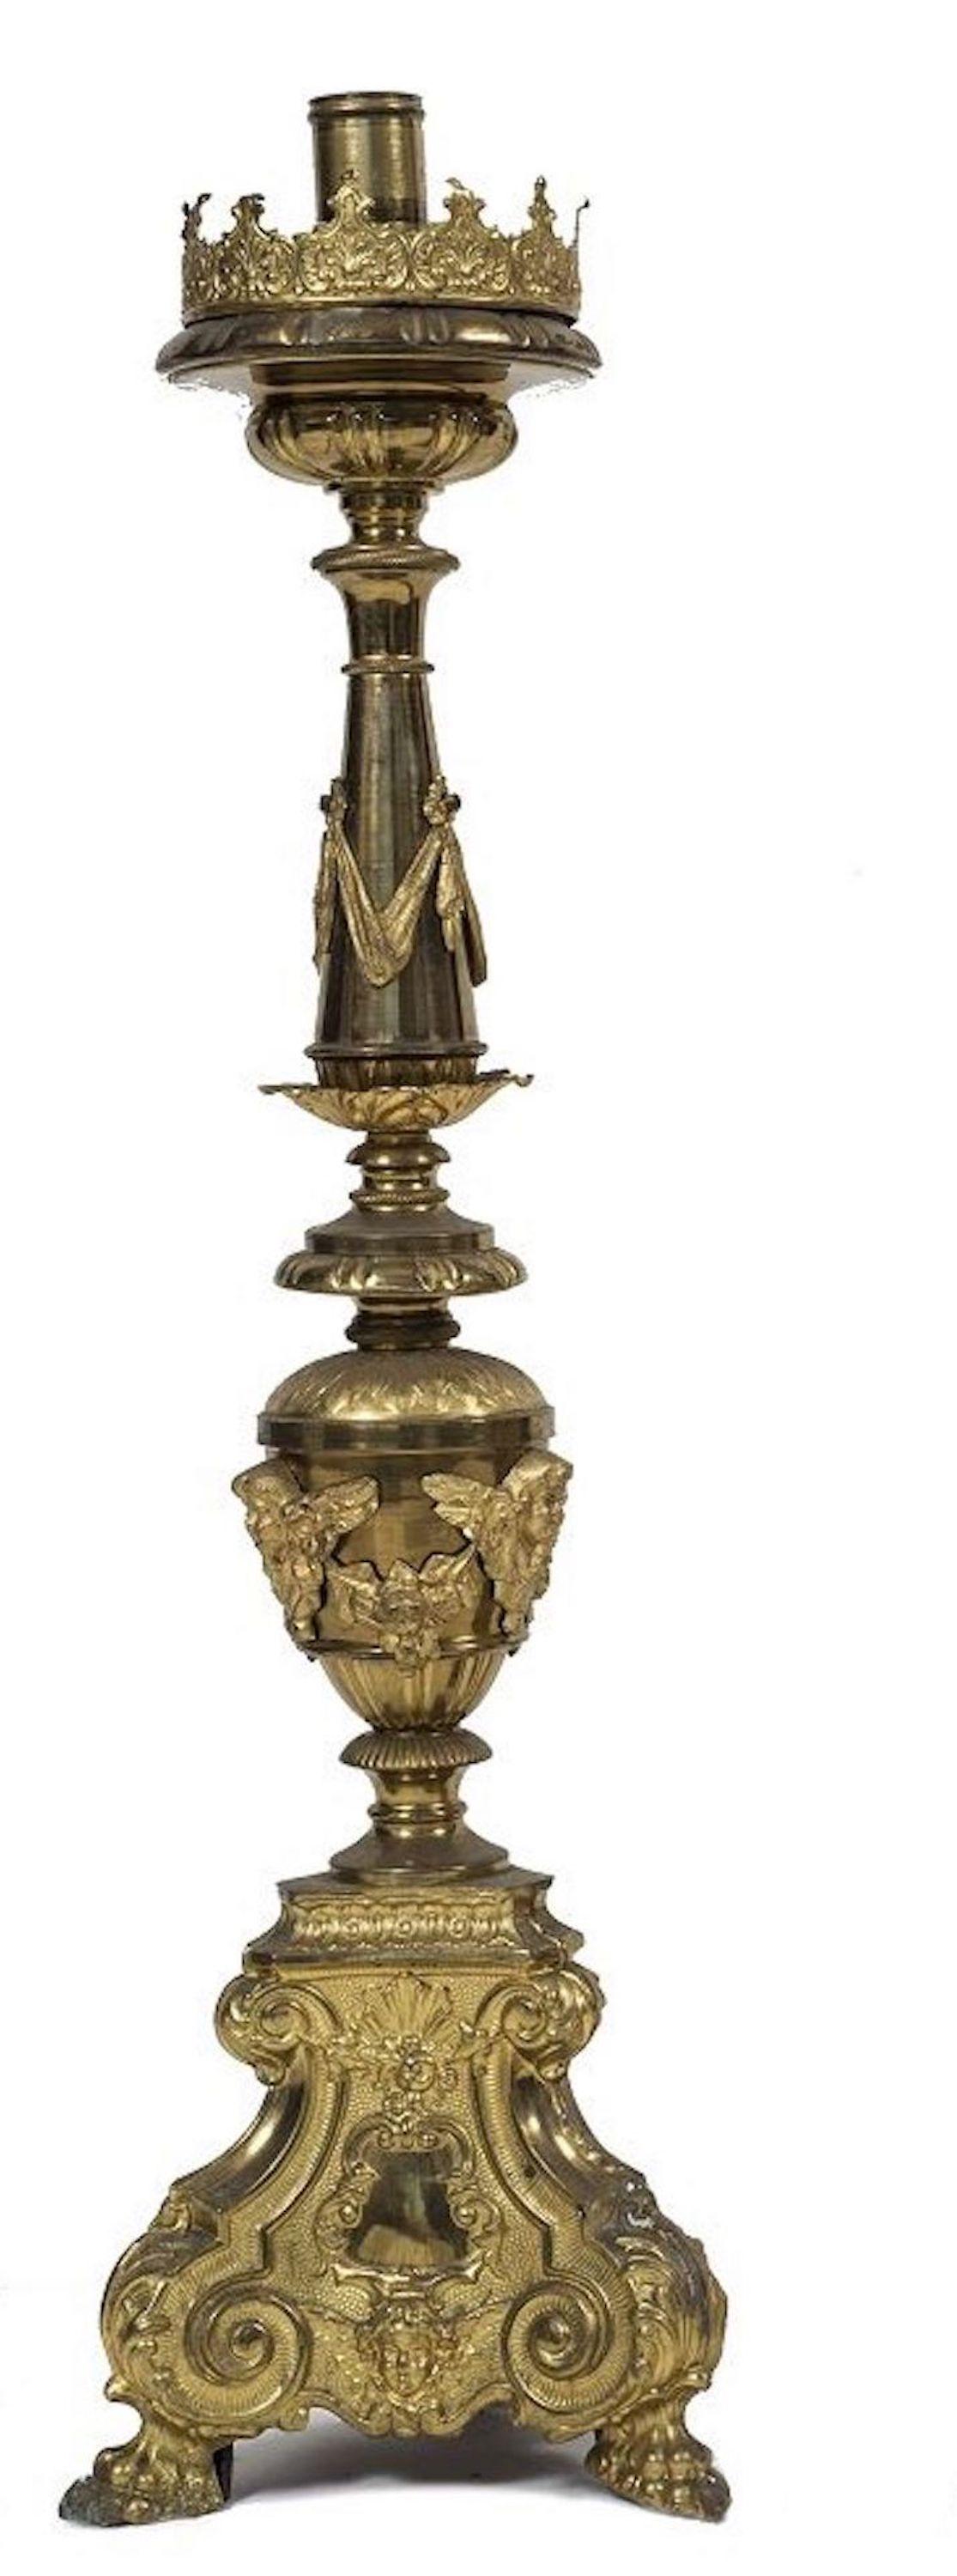 18th Century and Earlier Vintage Pair of Candlesticks, Italian Baroque Style, 18th Century